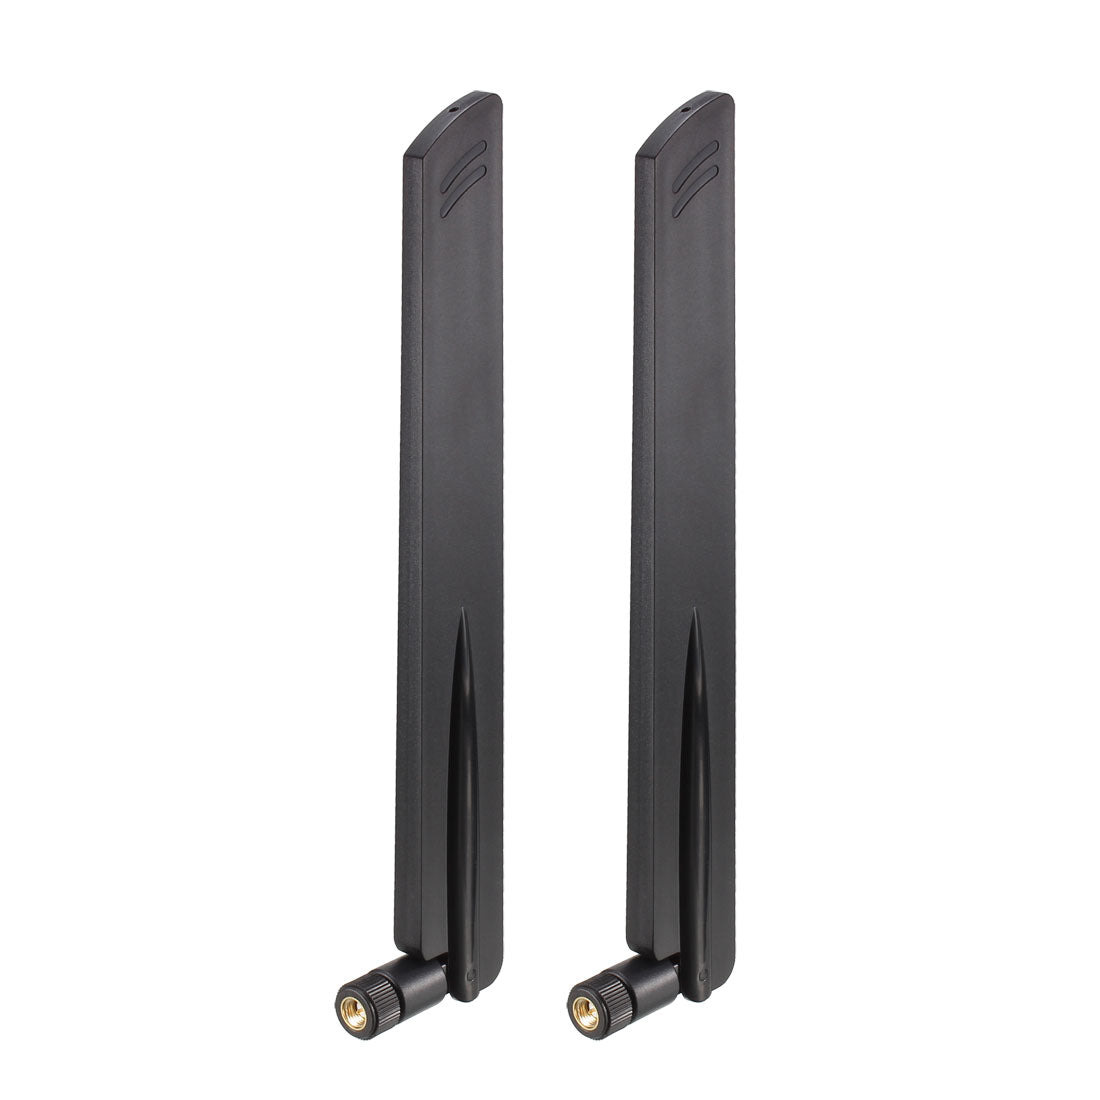 uxcell Uxcell GSM GPRS WCDMA LTE Antenna 3G 4G 10dBi High Gain 700-2700MHz SMA Male Connector Omni Direction Foldable Paddle Type 2Pcs